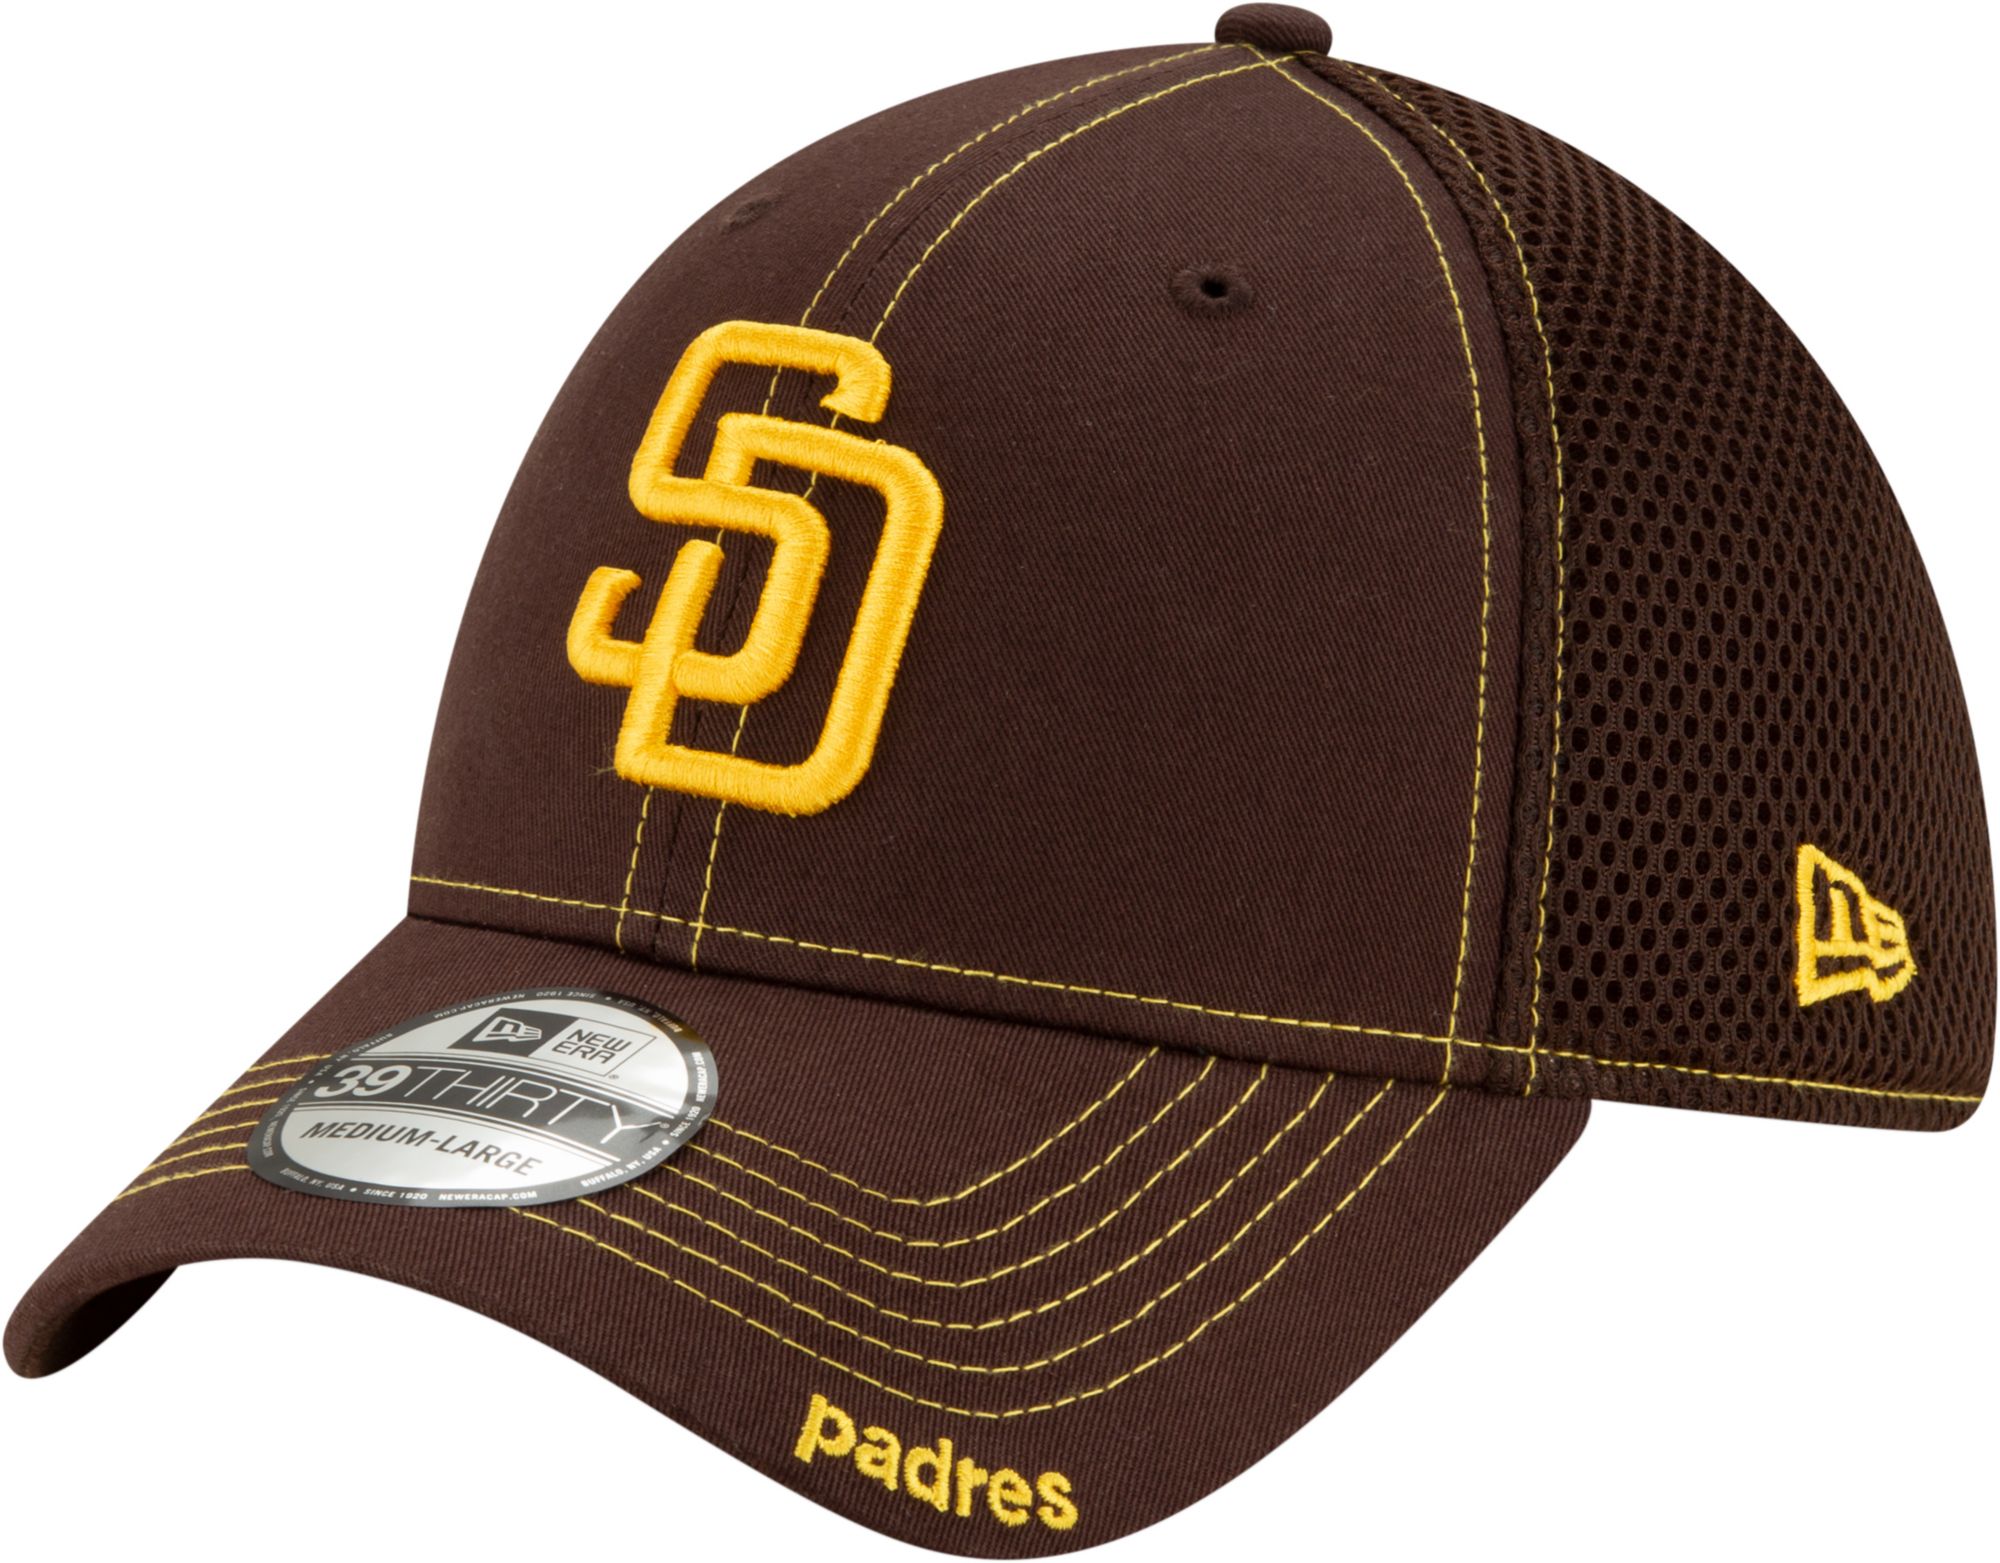 San Diego Padres Fanatics Branded Iconic Color Blocked Fitted Hat -  White/Brown